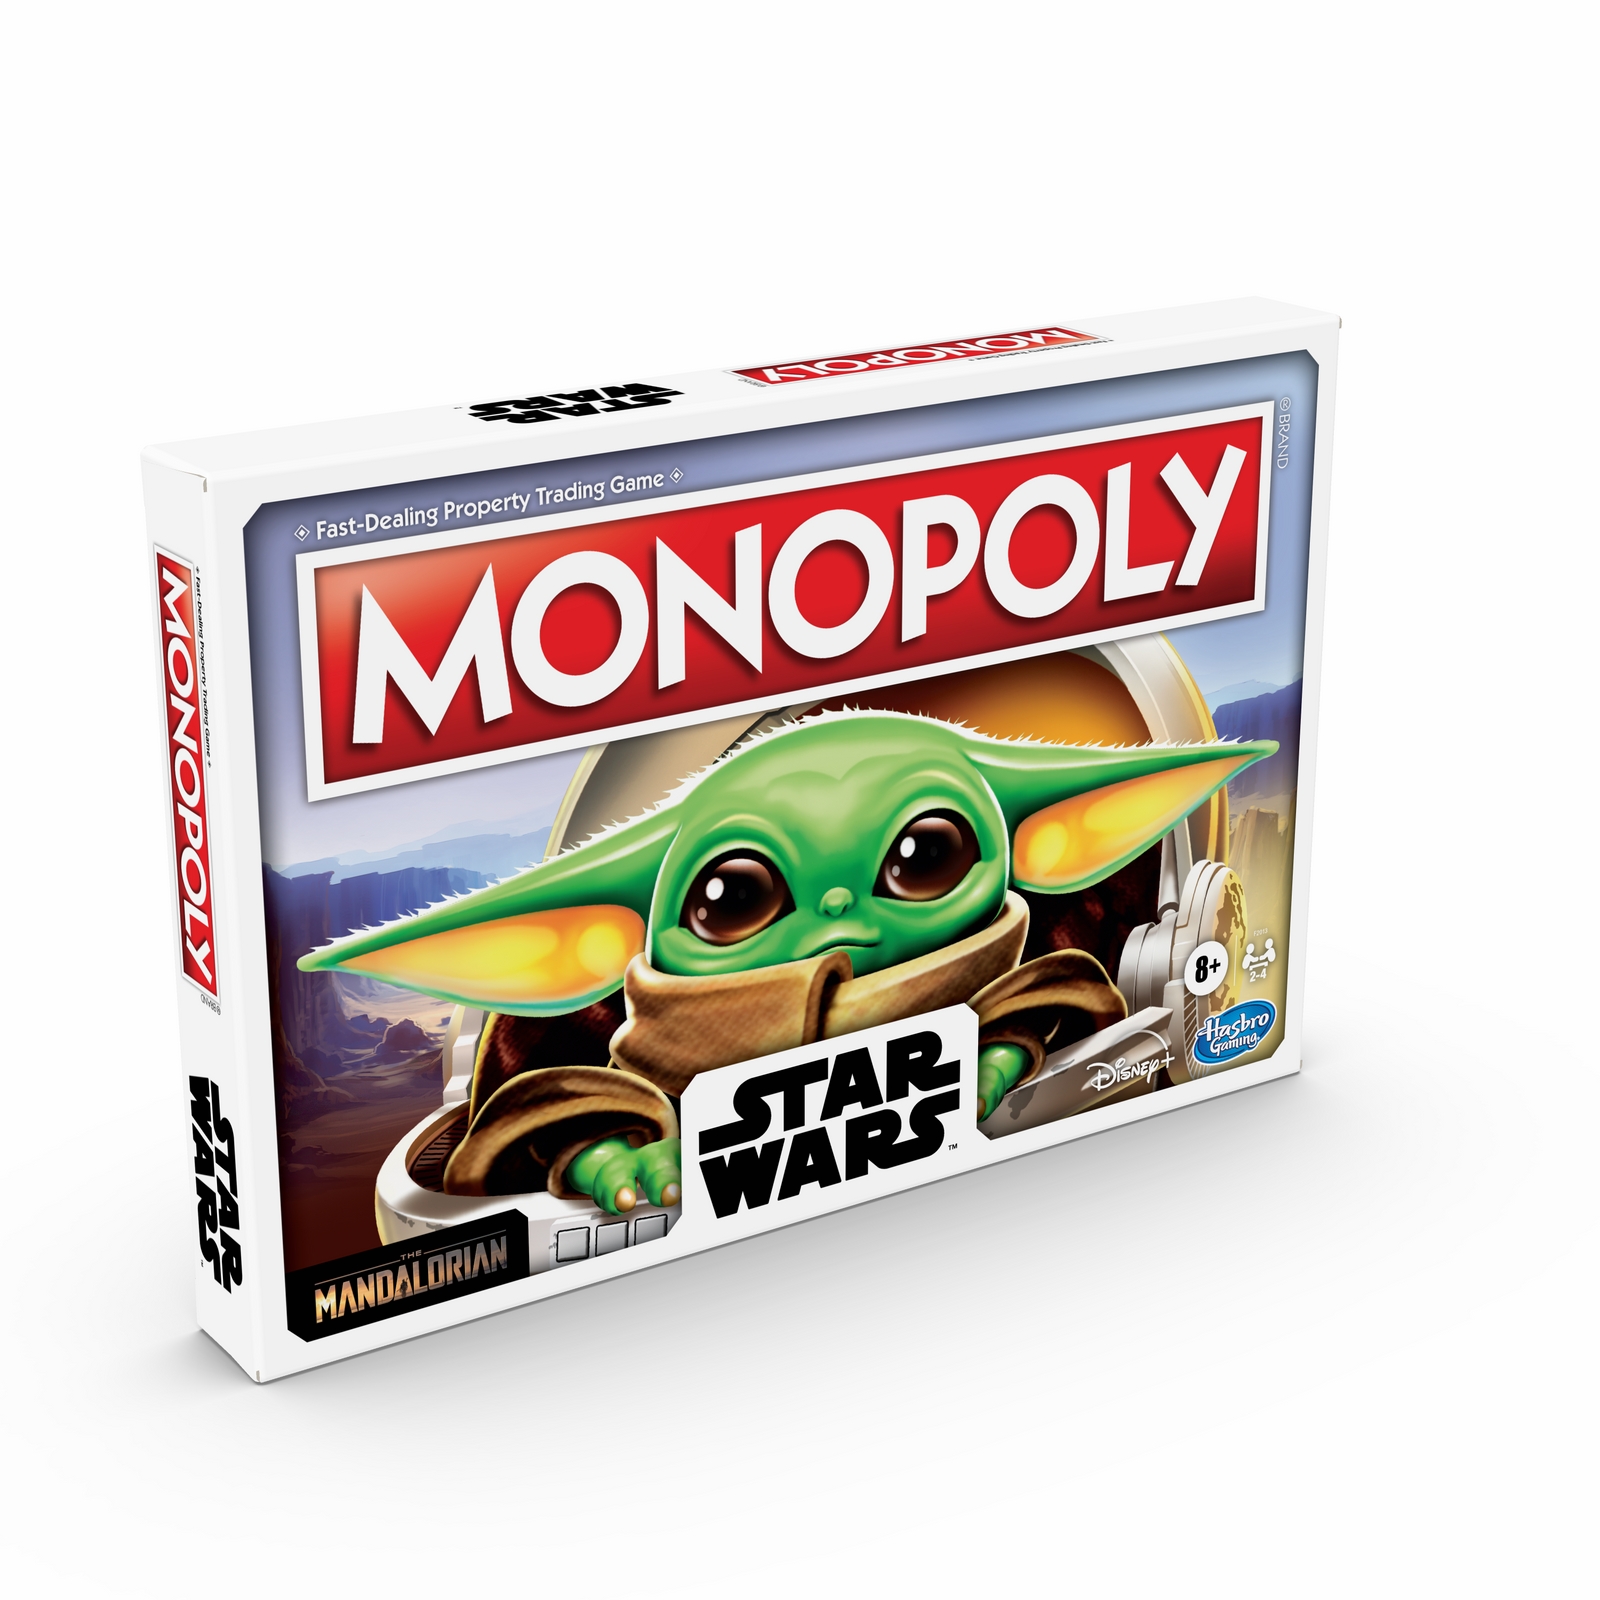 MONOPOLY STAR WARS THE CHILD EDITION - in pck (1).jpg